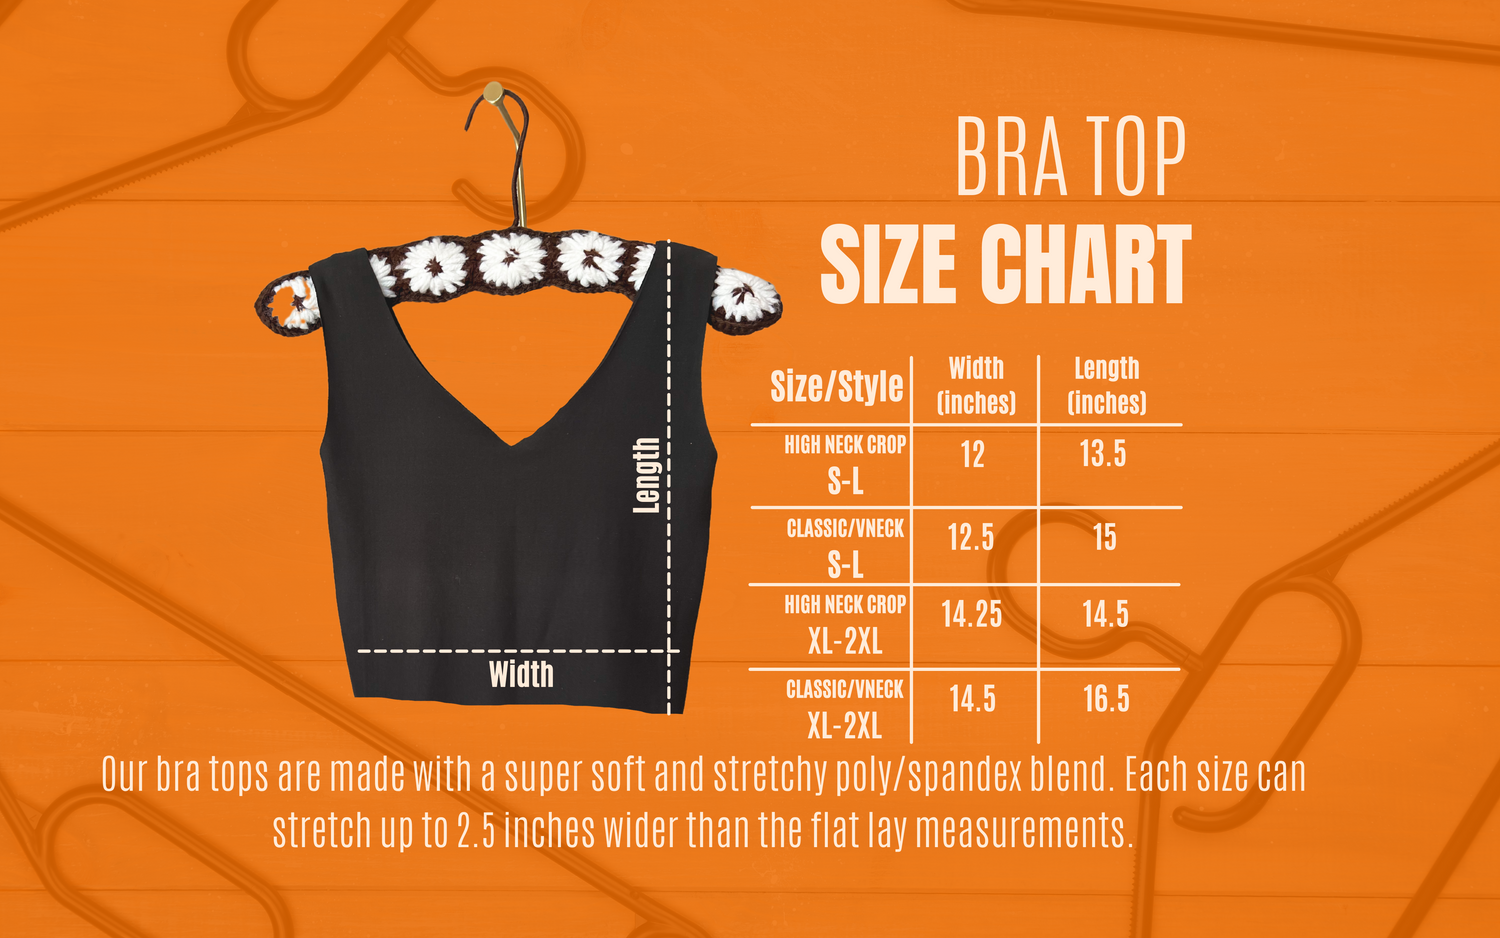 Bra Top Size Chart: Small through large high neck is 12 inches wide and 13.5 inches long from shoulder to hem. Size small through large classic and vneck is 12.5 inches wide and 15 inches long. The size XL-2XL high neck is 14.25 inches wide and 14.5 inches long. The XL-2XL classic and vneck is 14.5 inches wide and 16.5 inches long.